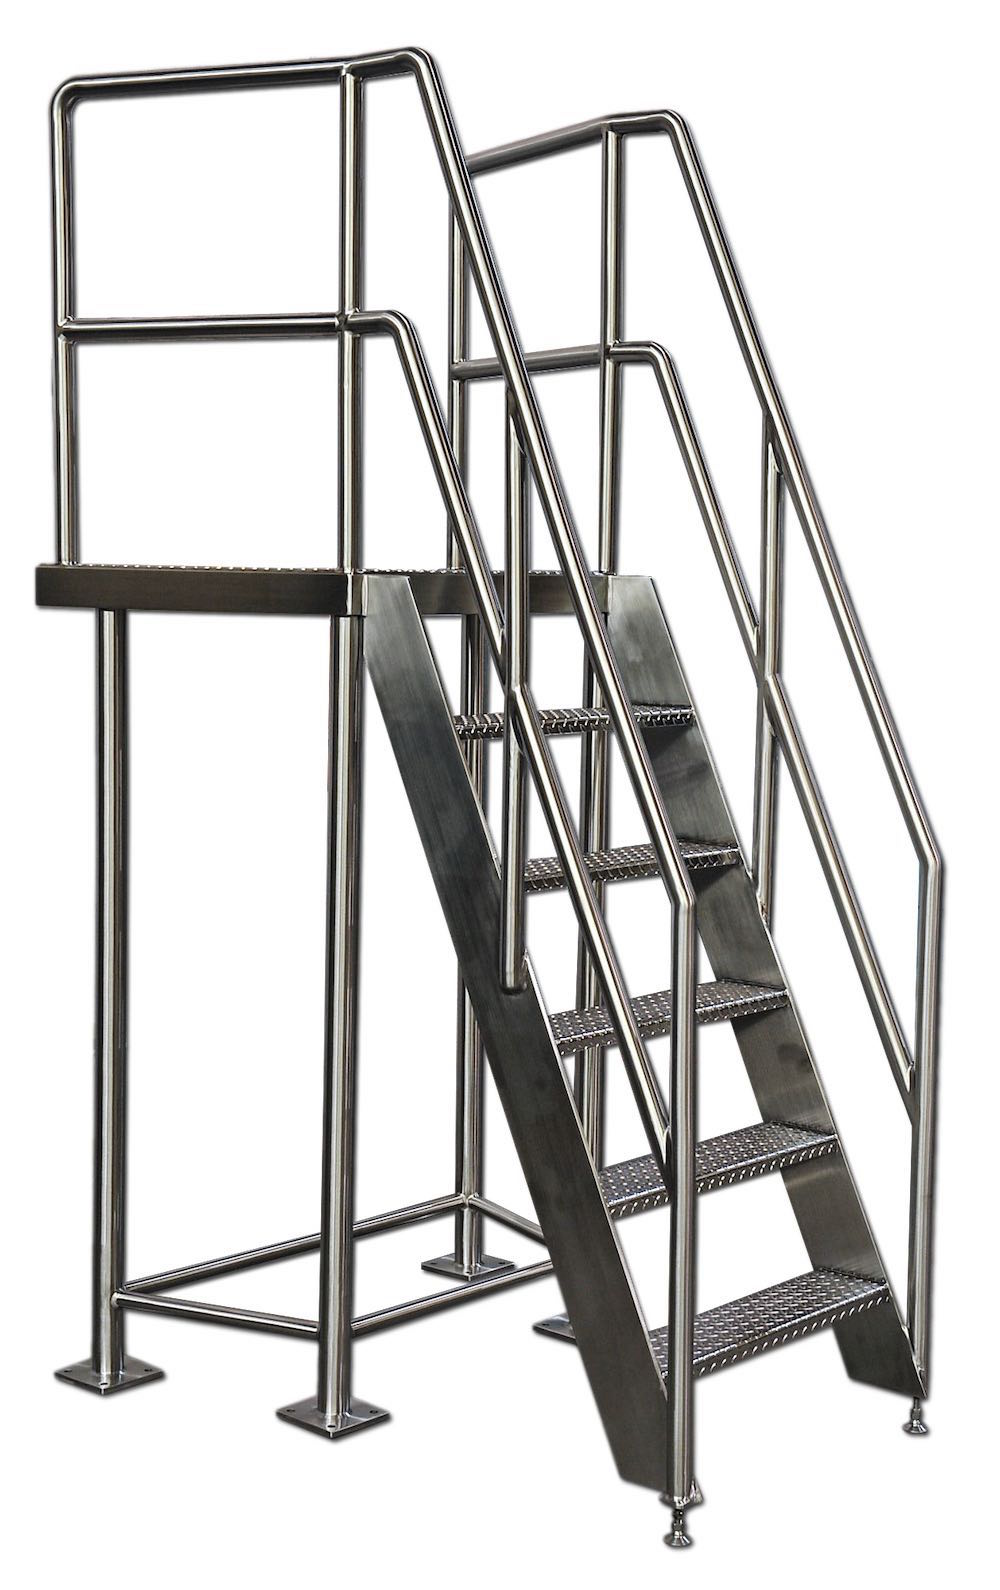 Custom-engineered equipment by Holloway includes these stainless steel stairs.